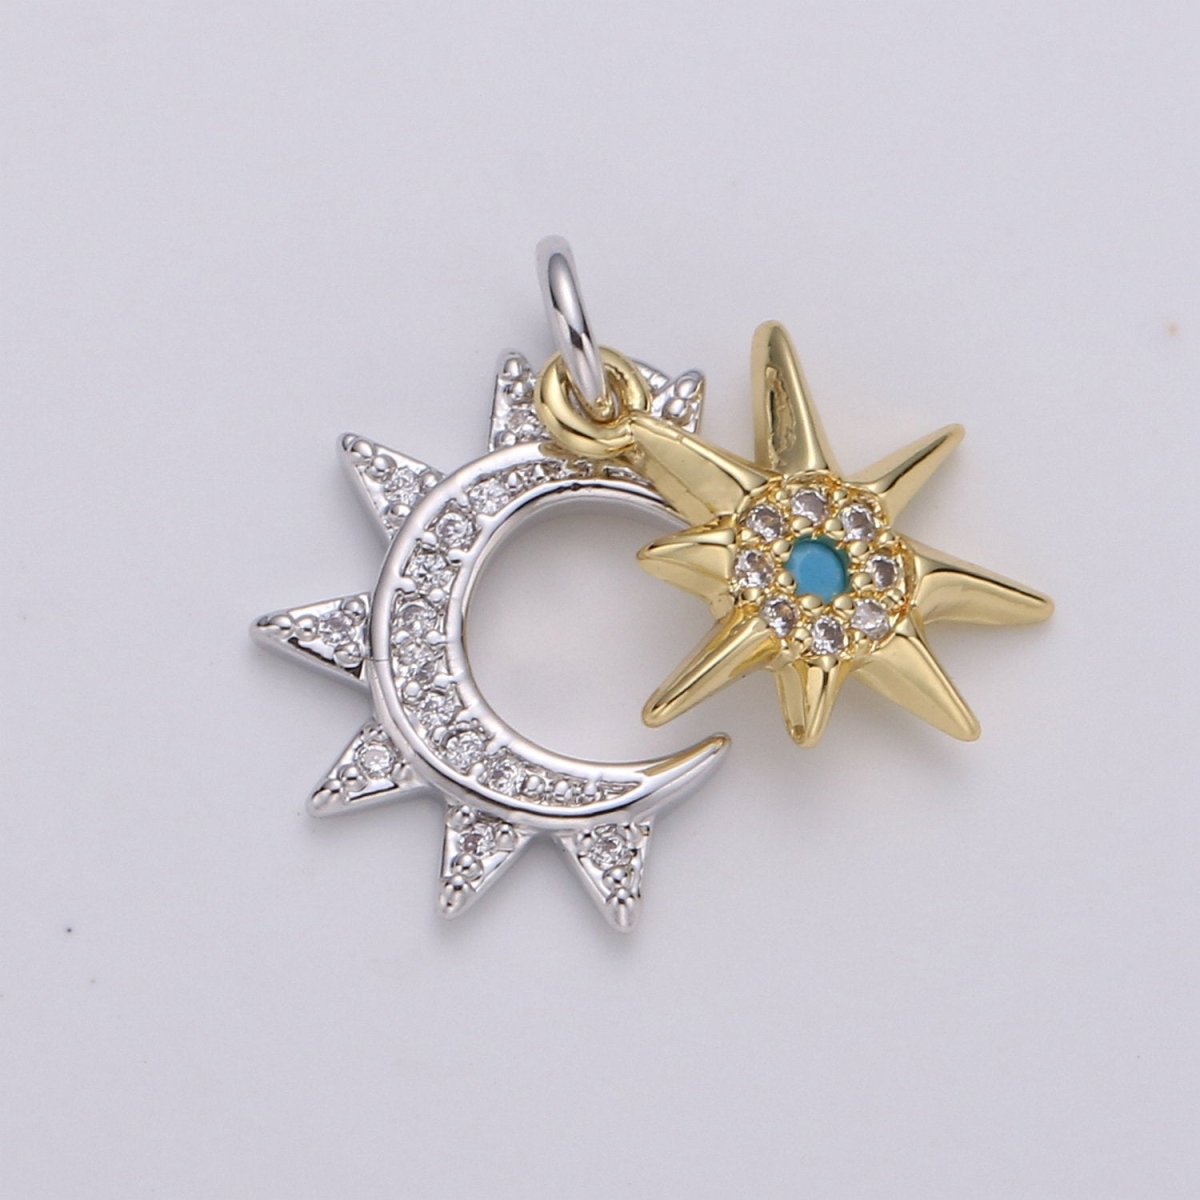 24K Gold Filled Moon Charm, Crescent Moon Pendant, Micro Pave Star Necklace, Dainty Gold Celestial Jewelry Making Supply Aurora Necklace D-446 - D-449 - DLUXCA